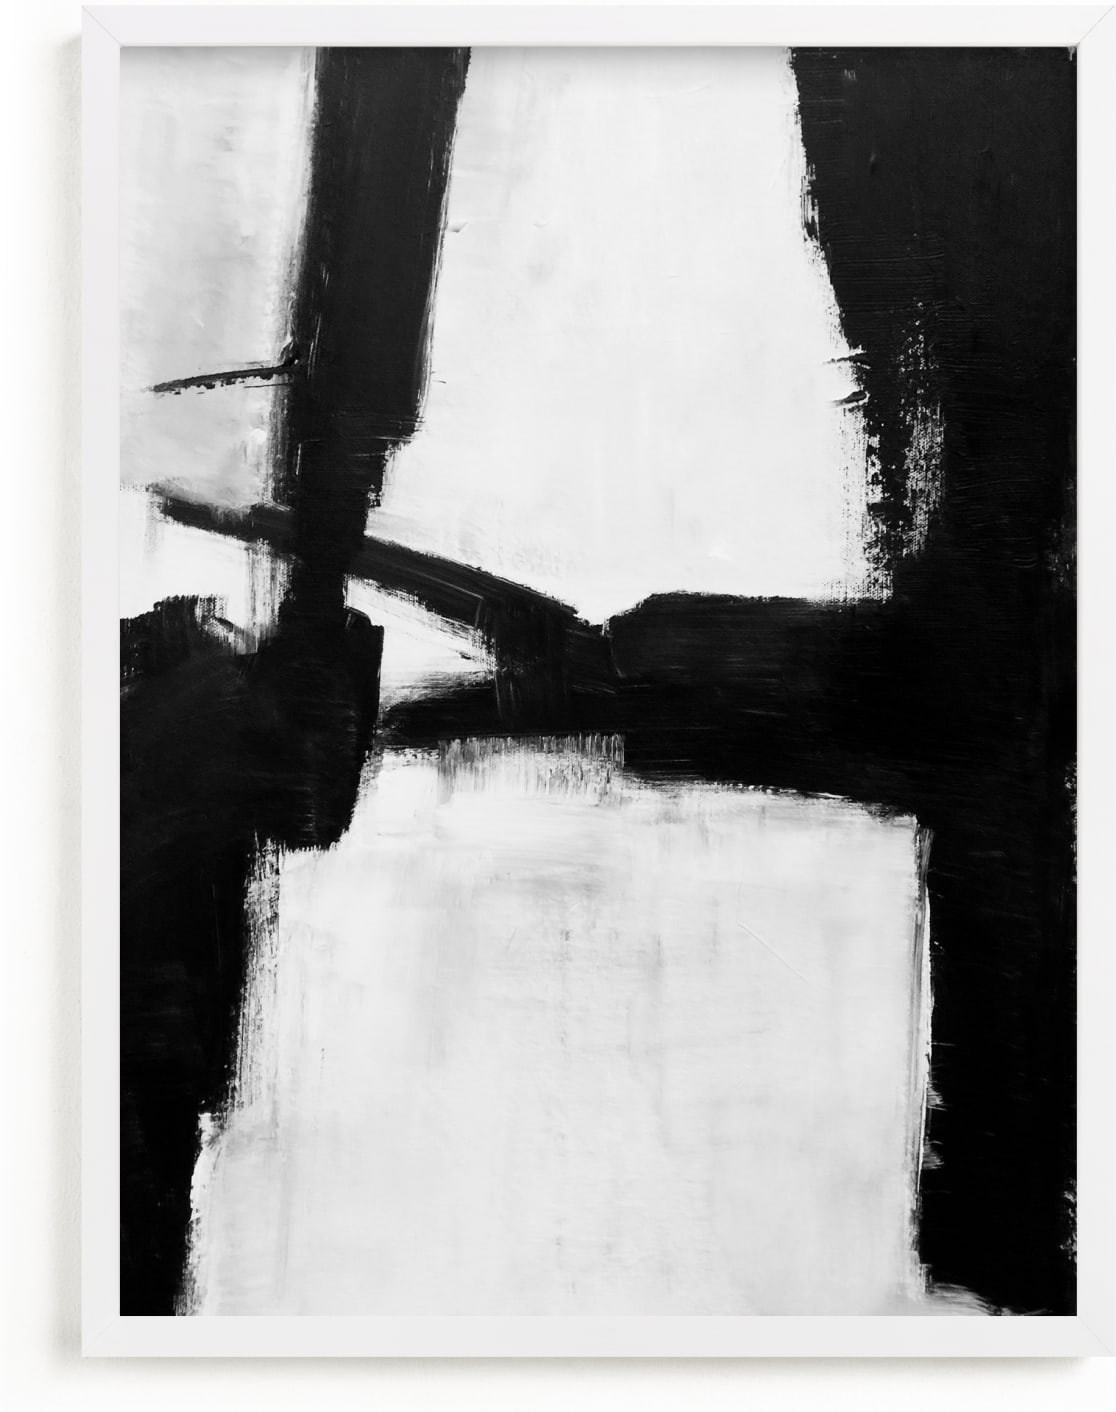 This is a black and white art by Ilana Greenberg called Gentle Embrace.